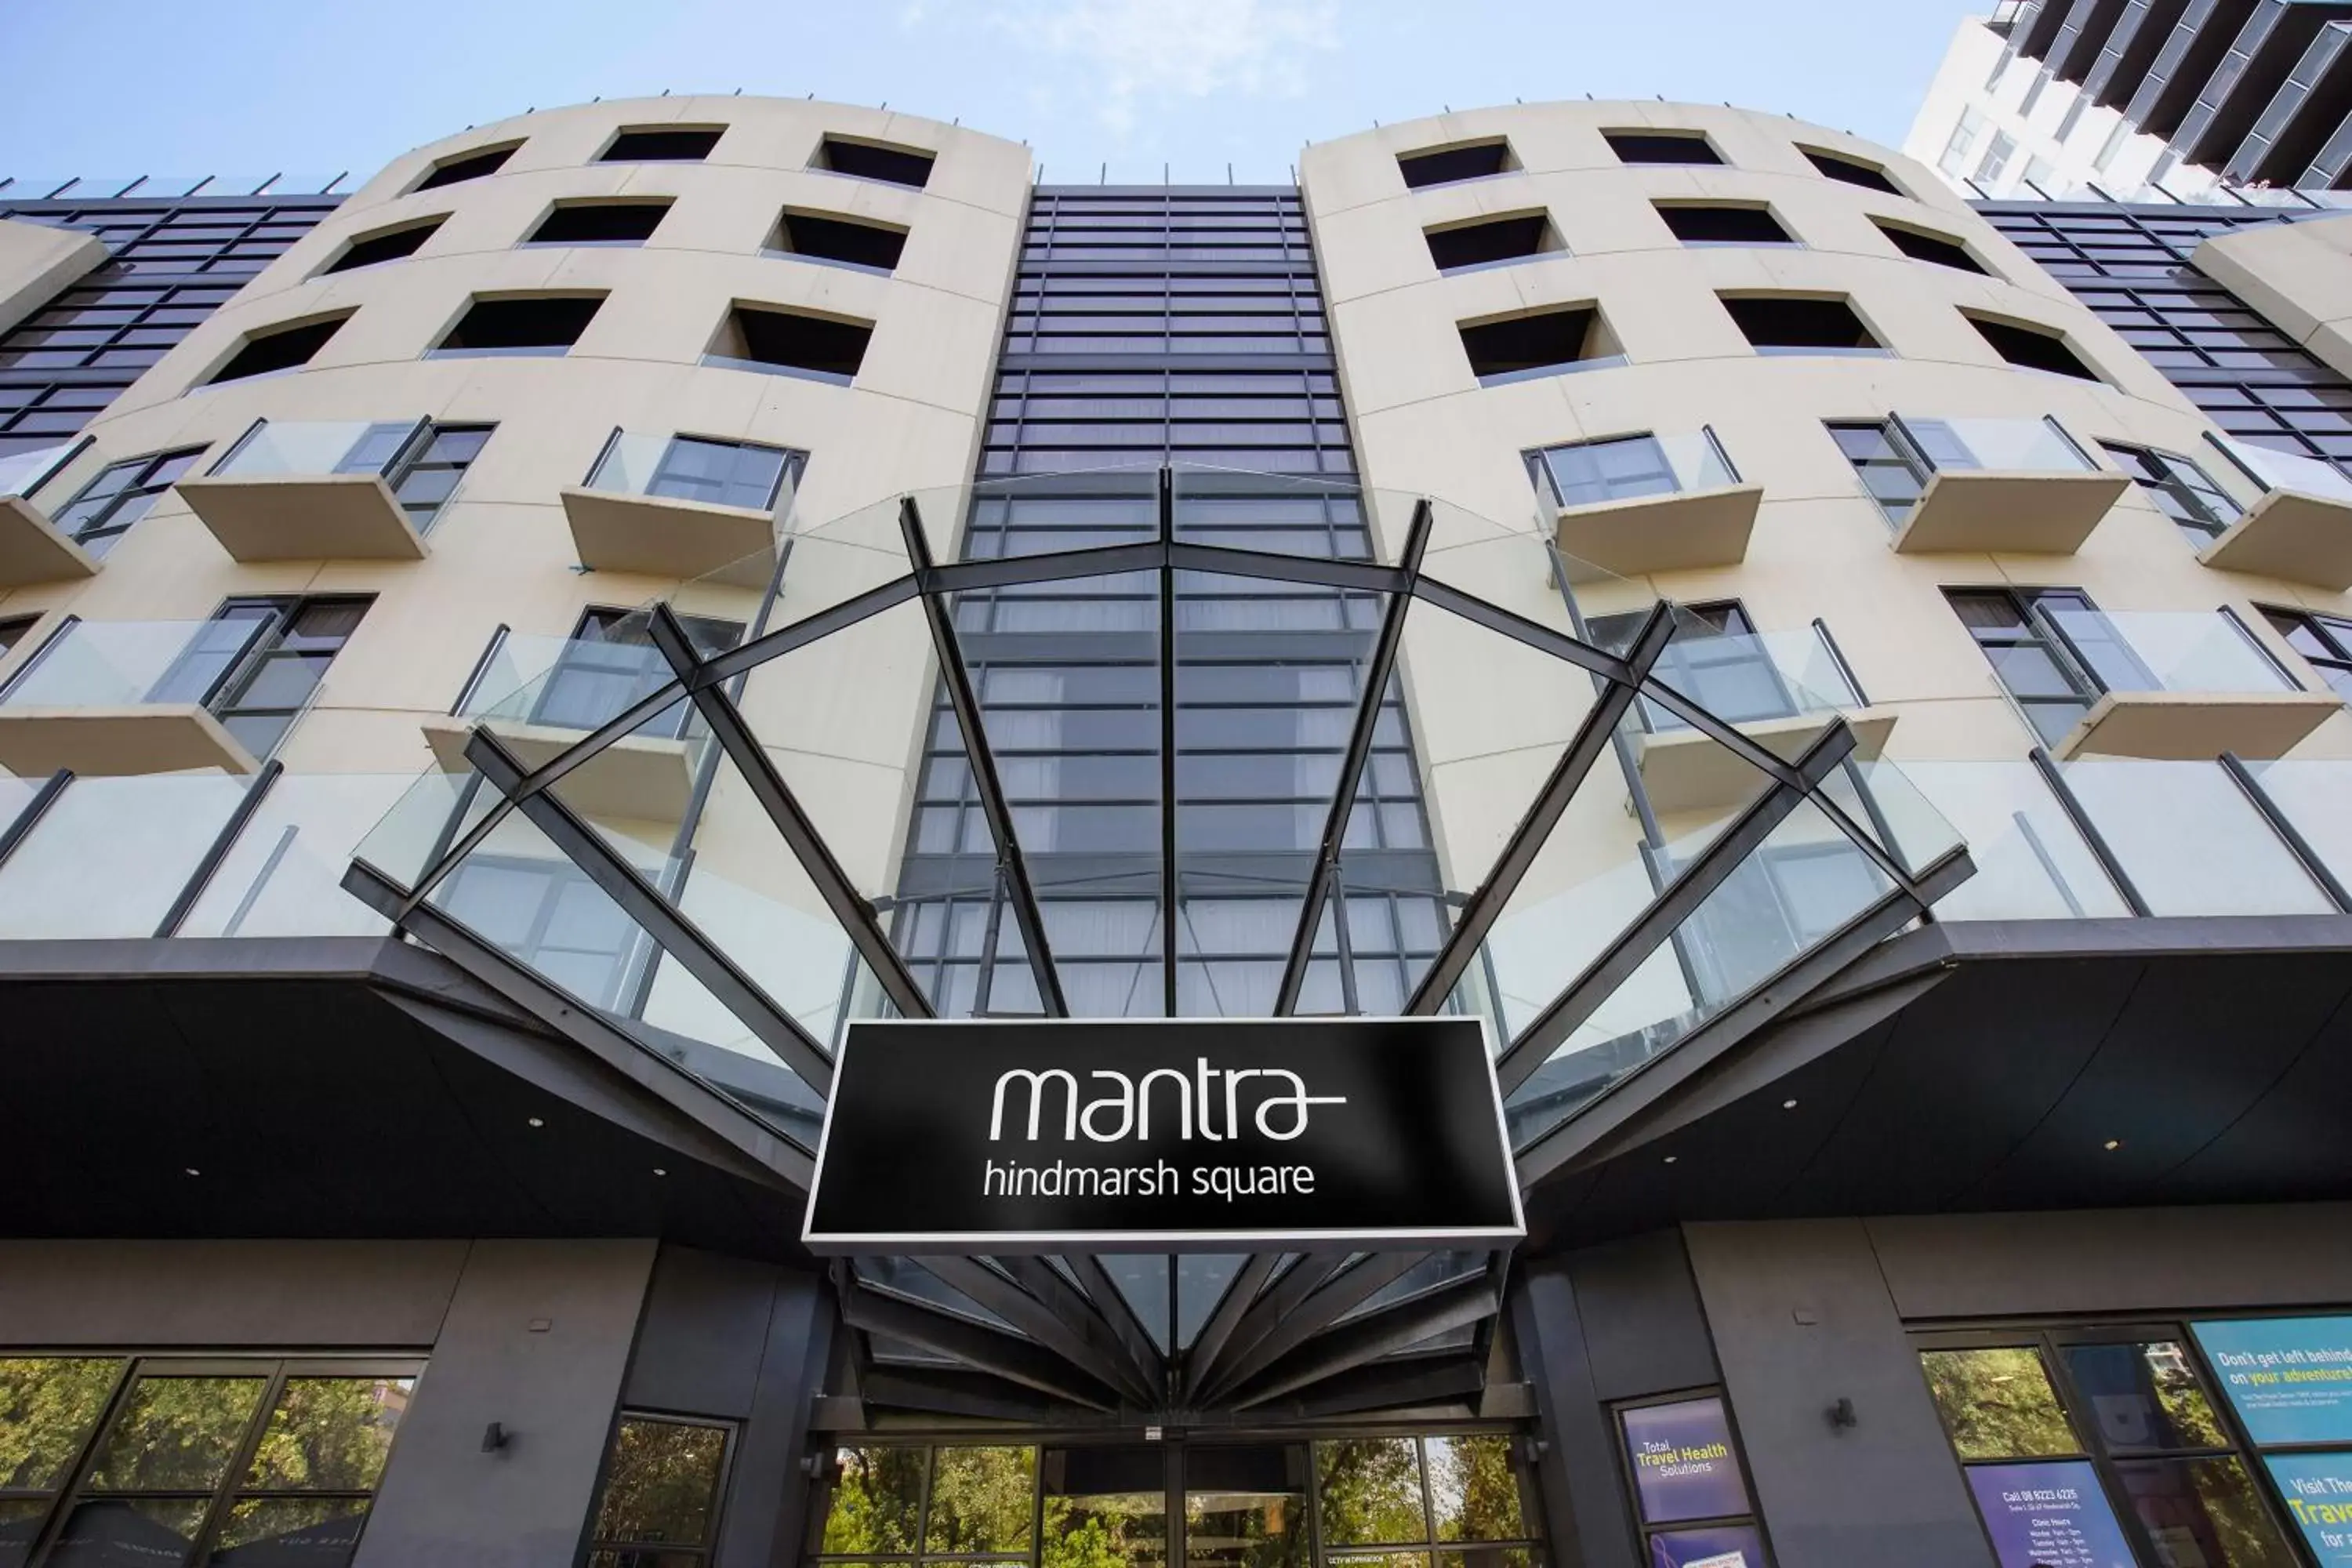 Property building in Mantra Hindmarsh Square